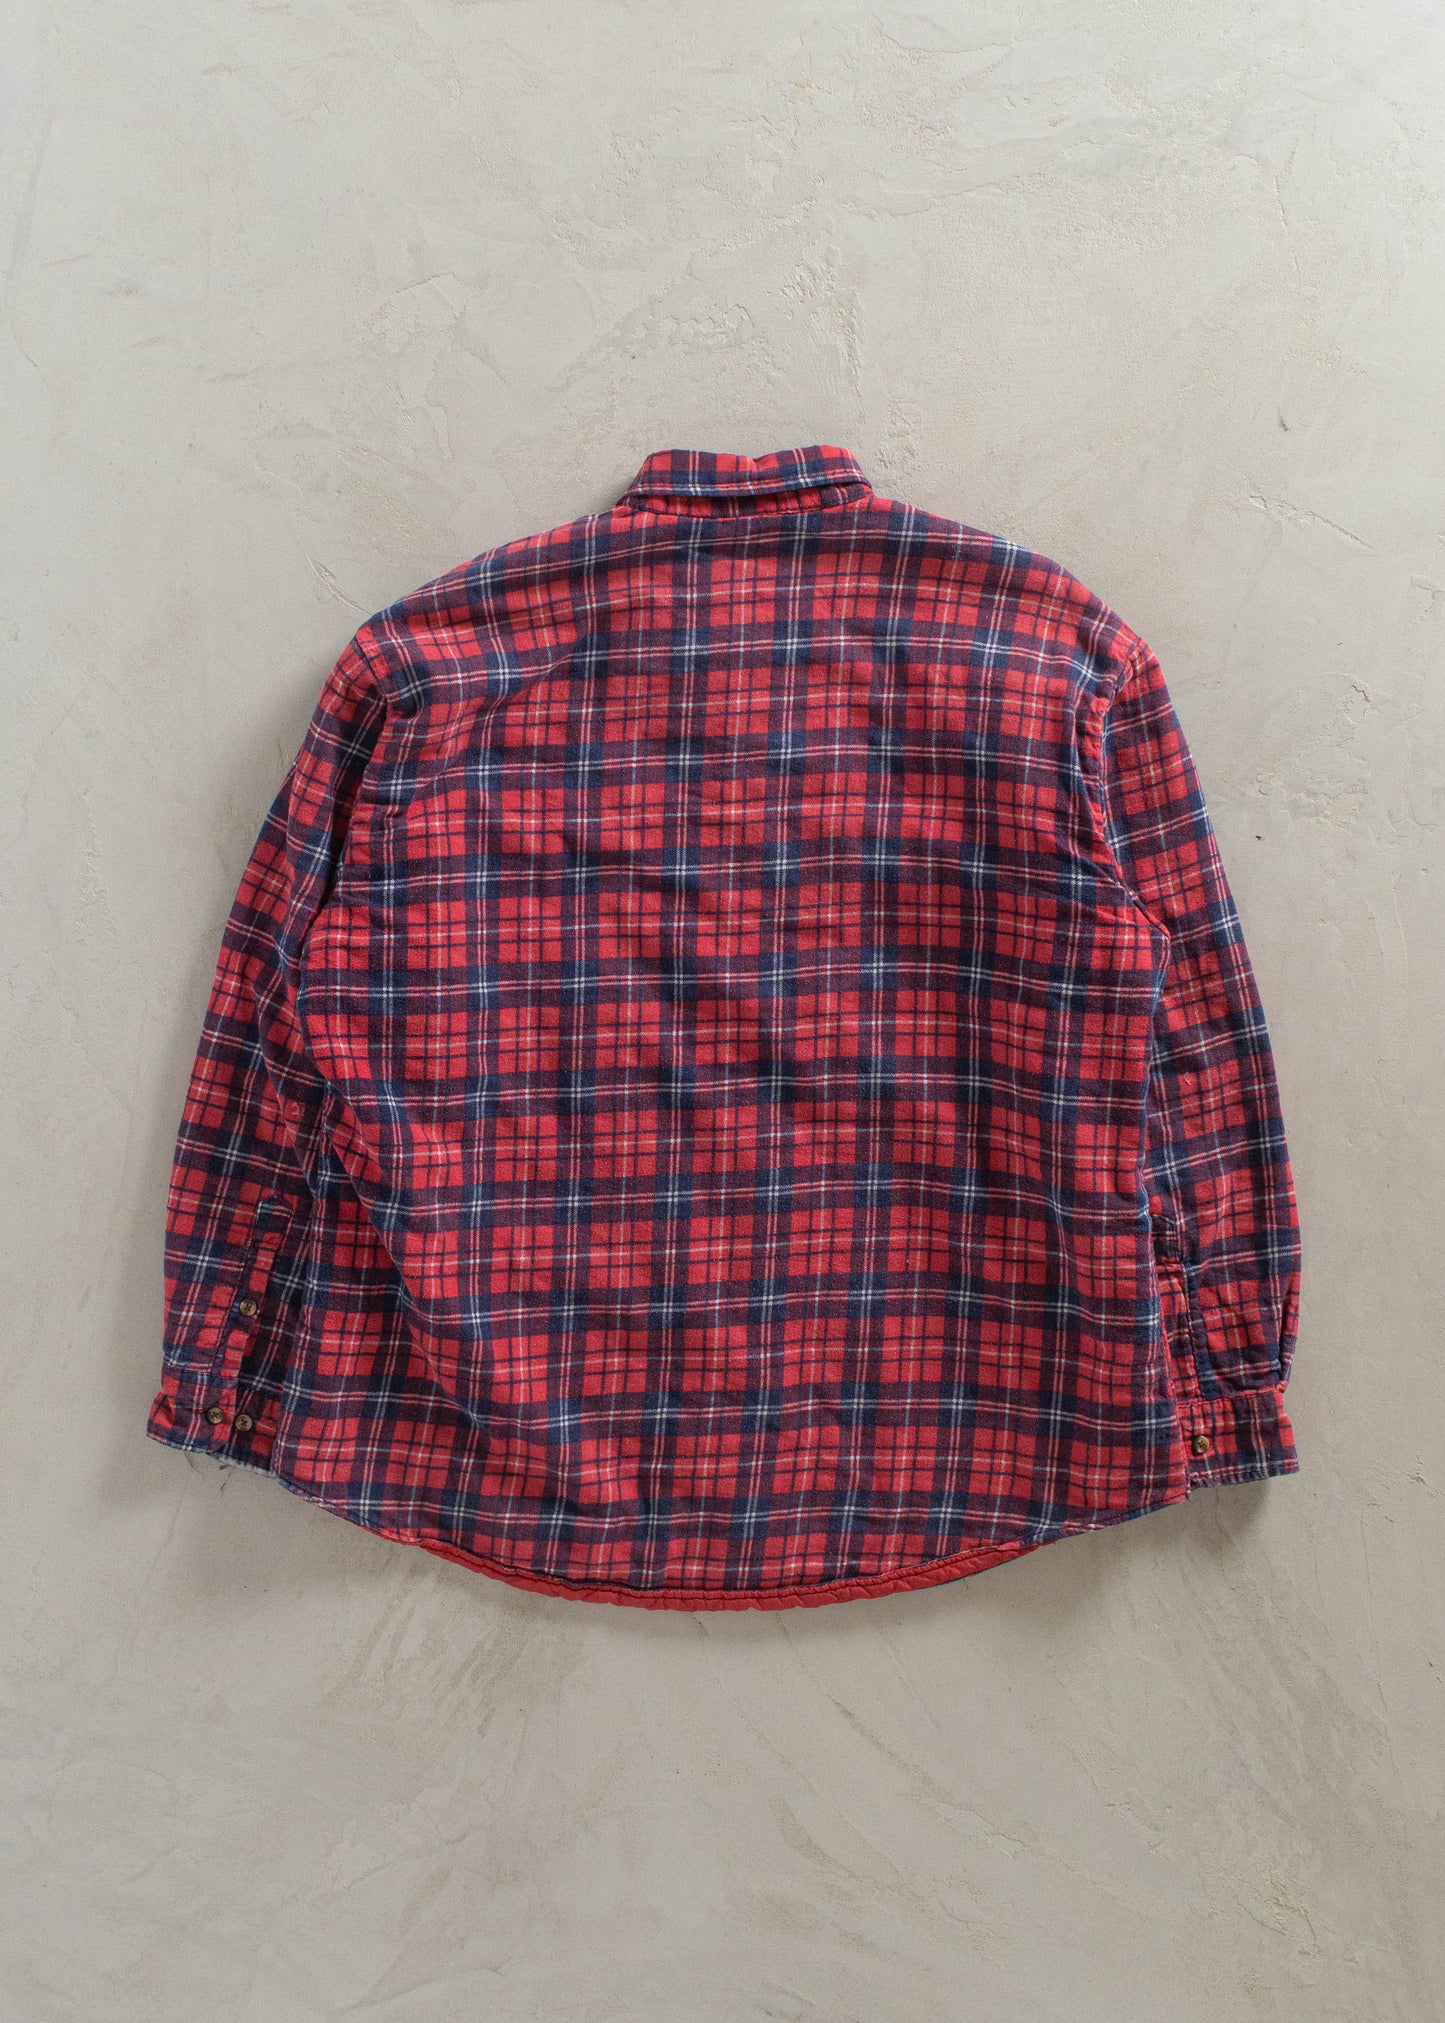 Vintage 1990s Padded Cotton Flannel Jacket Size XL/2XL